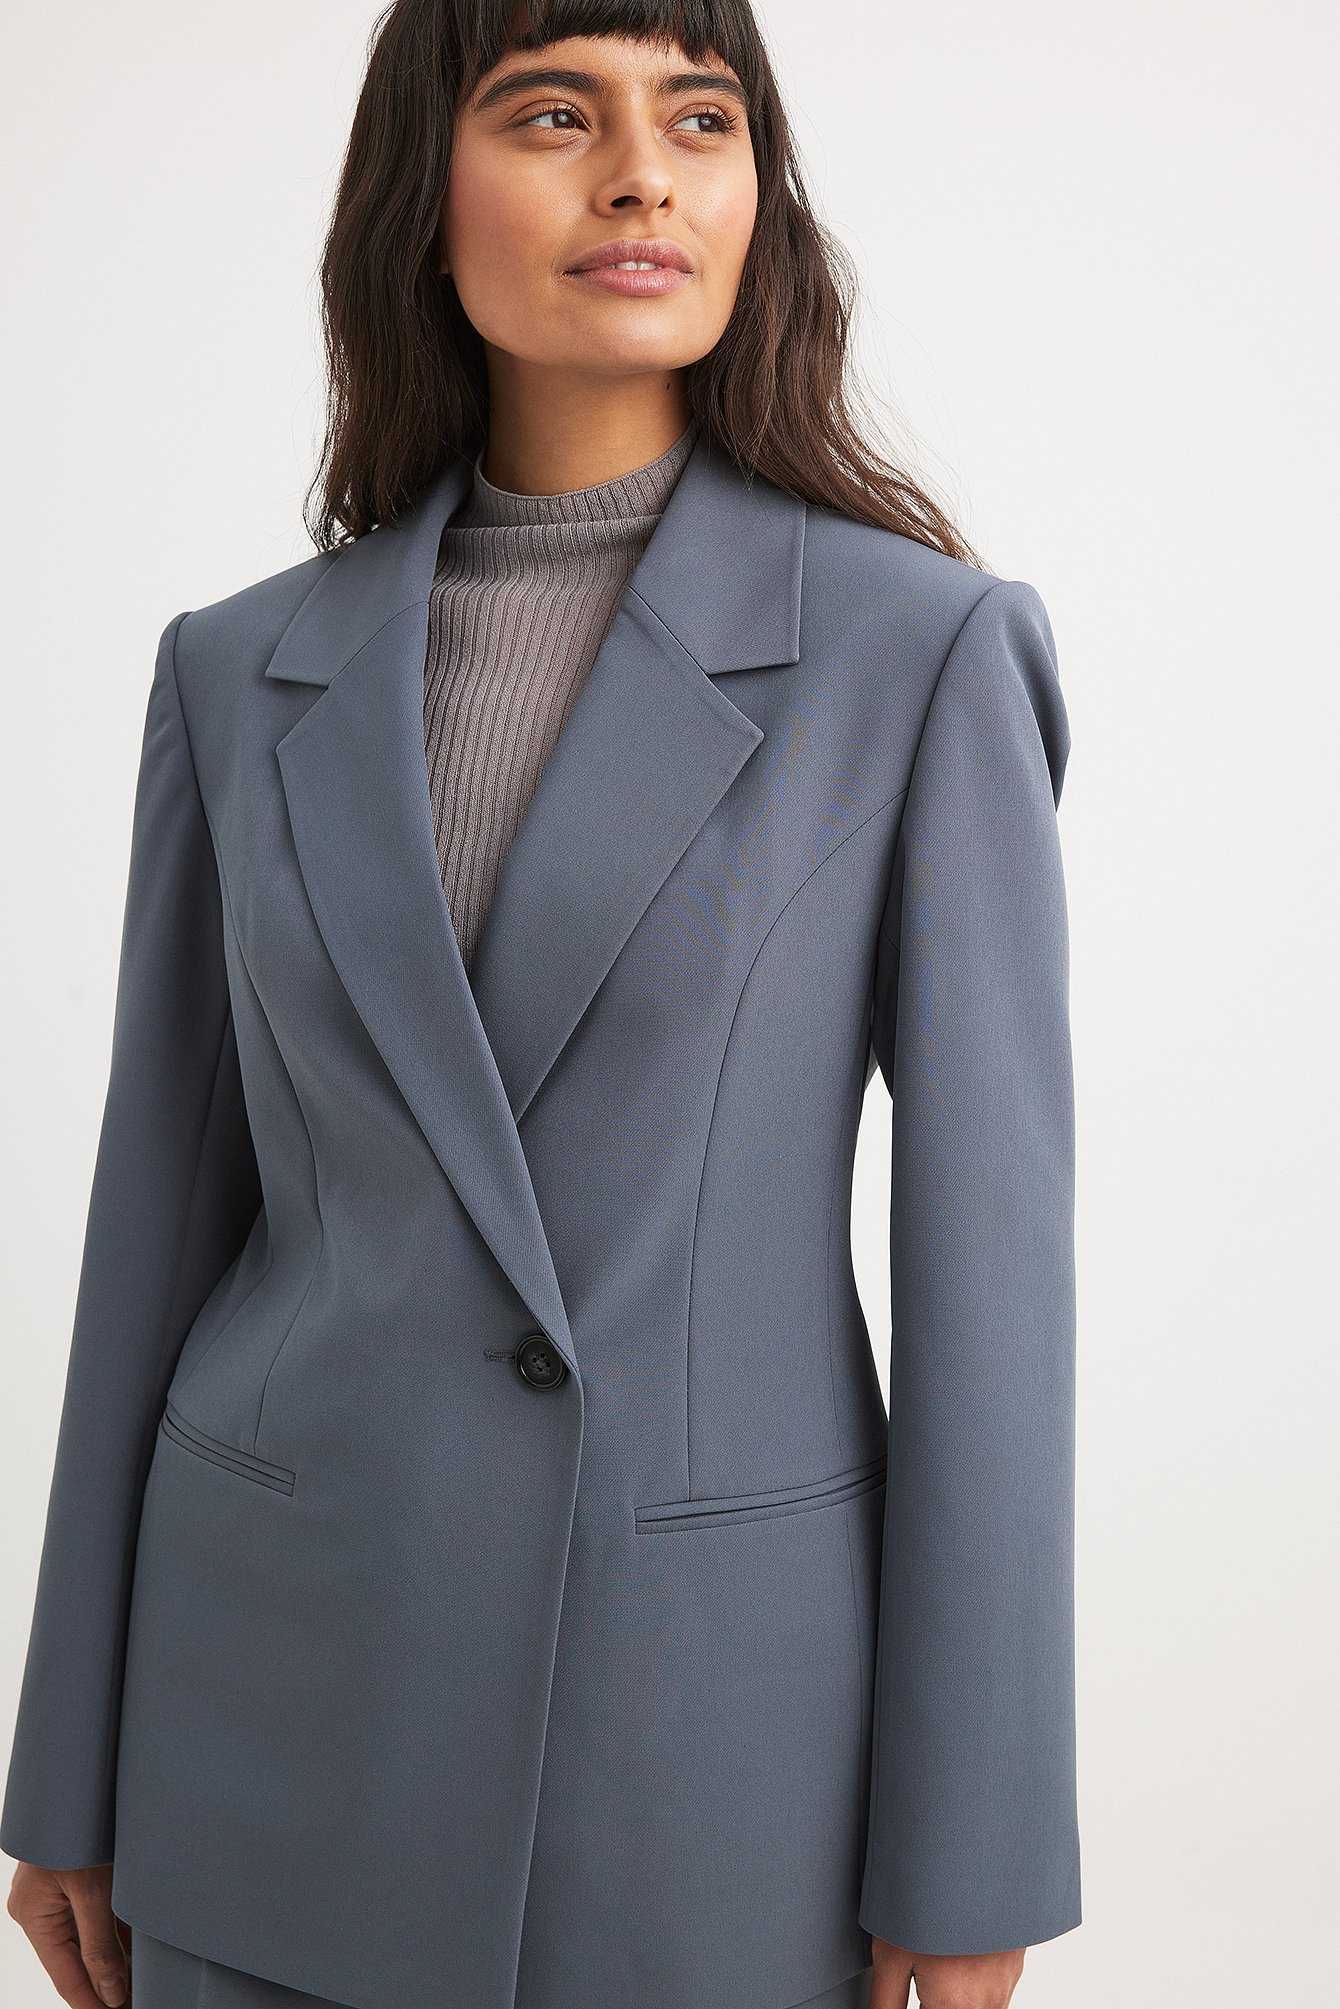 Details 63+ womens tailored suits